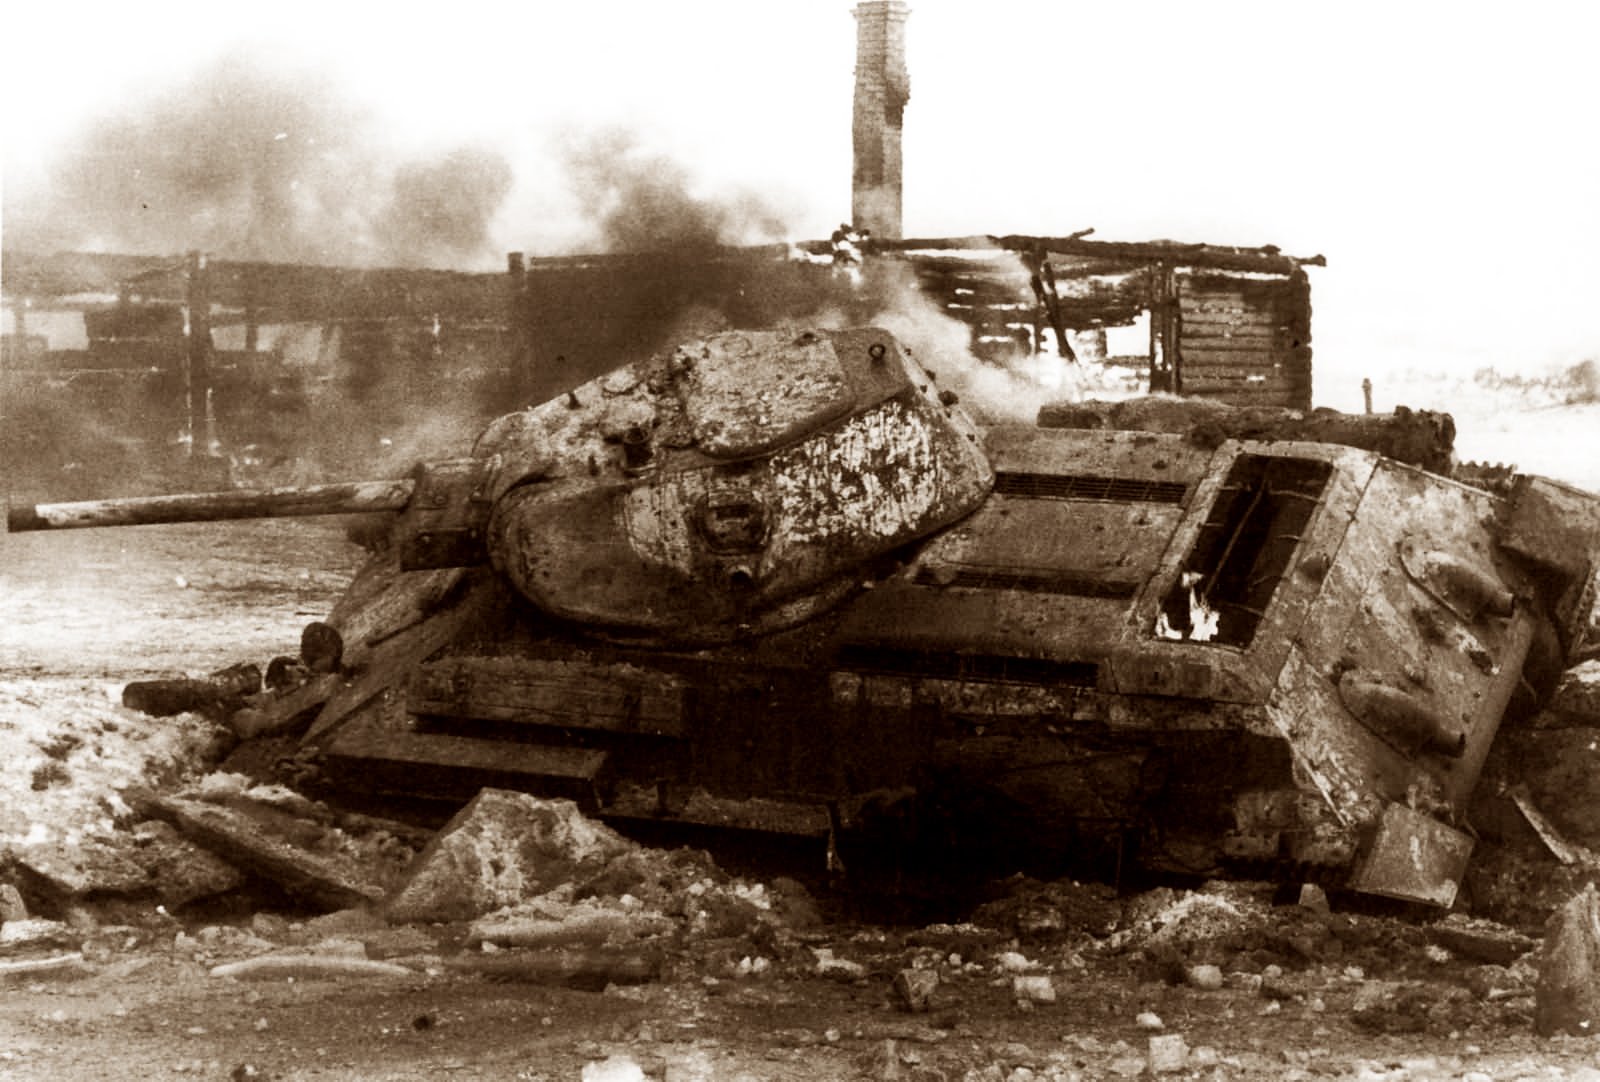 A black and white photo of a destroyed T-34 tank in a warzone with a burning building and a smokestack in the background.